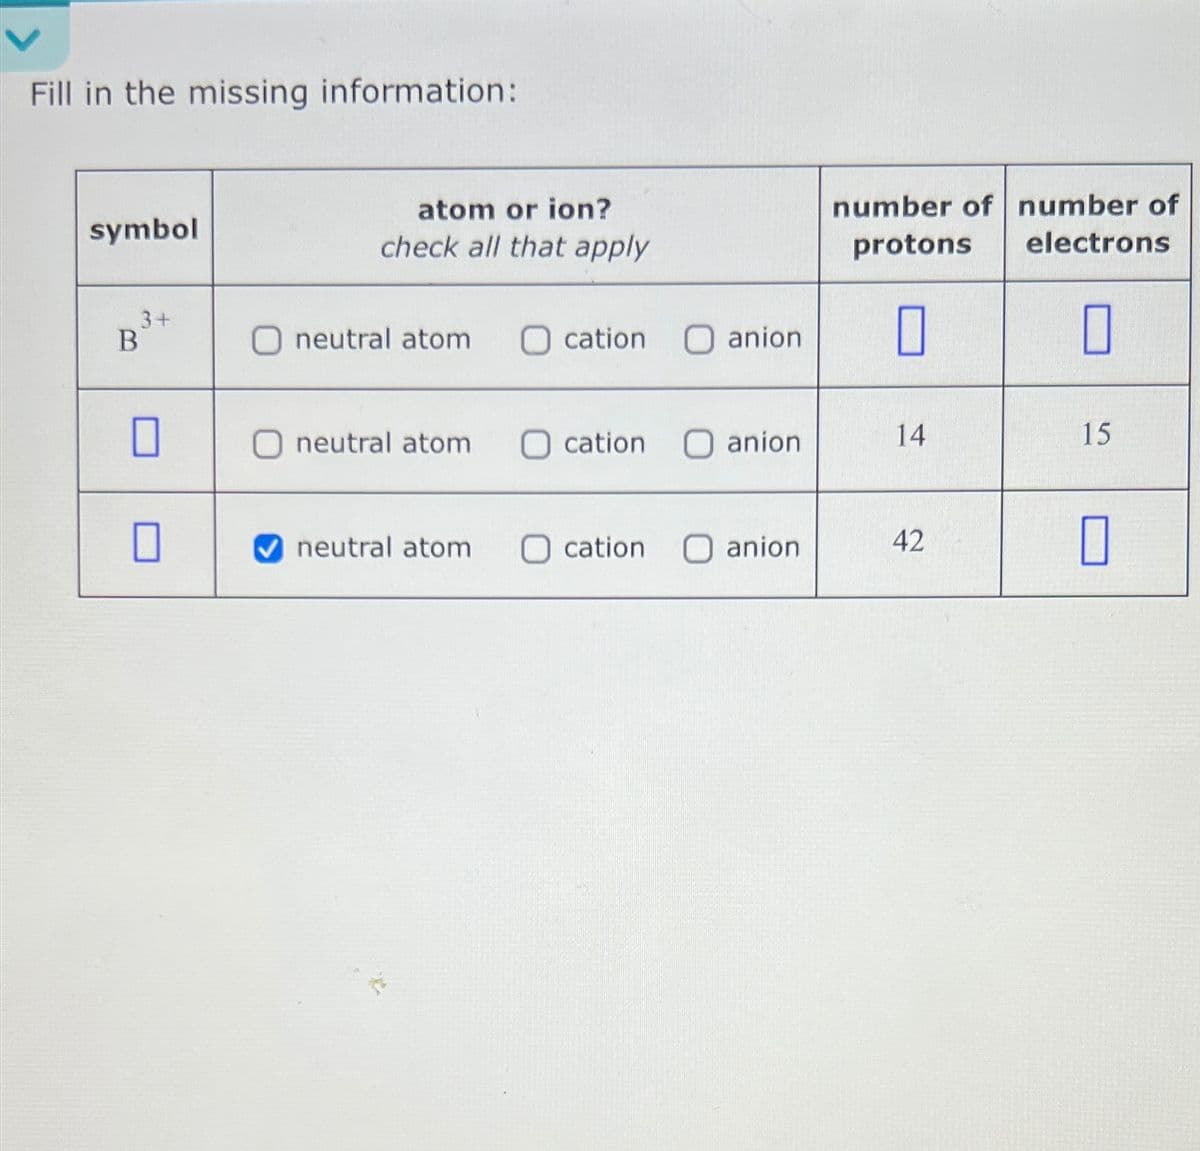 Fill in the missing information:
symbol
atom or ion?
check all that apply
protons
number of number of
electrons
3+
B
neutral atom
☐ cation
anion
☐
☐
☐
neutral atom
☐ cation ☐ anion
14
15
neutral atom Ocation
anion
42
☐